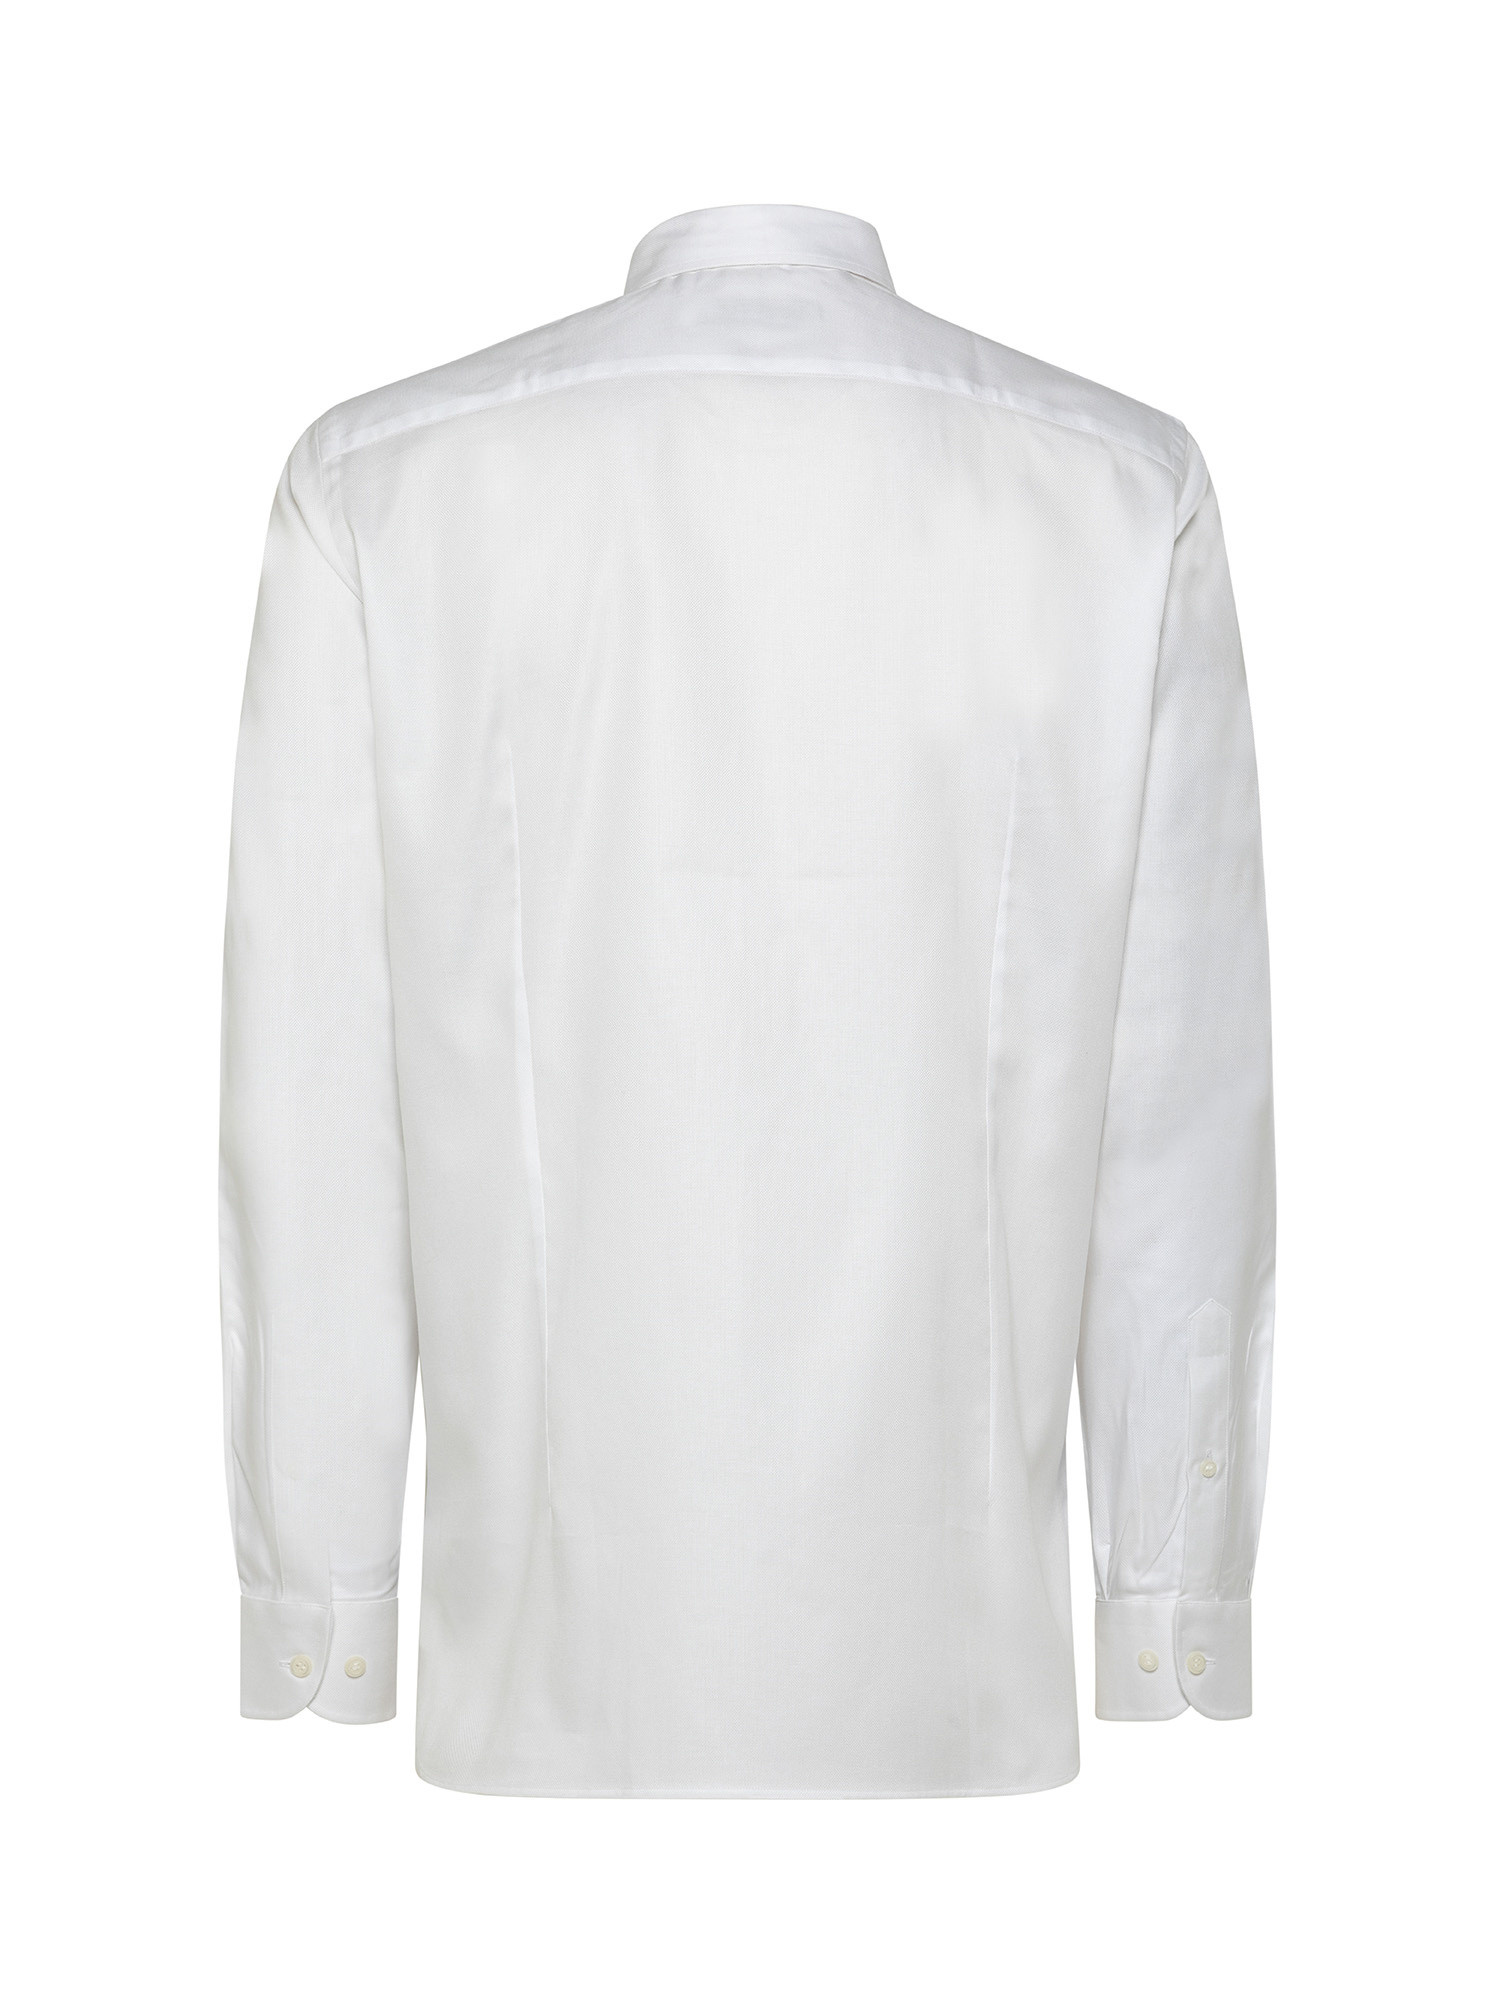 Slim fit shirt in pure cotton, White 1, large image number 2